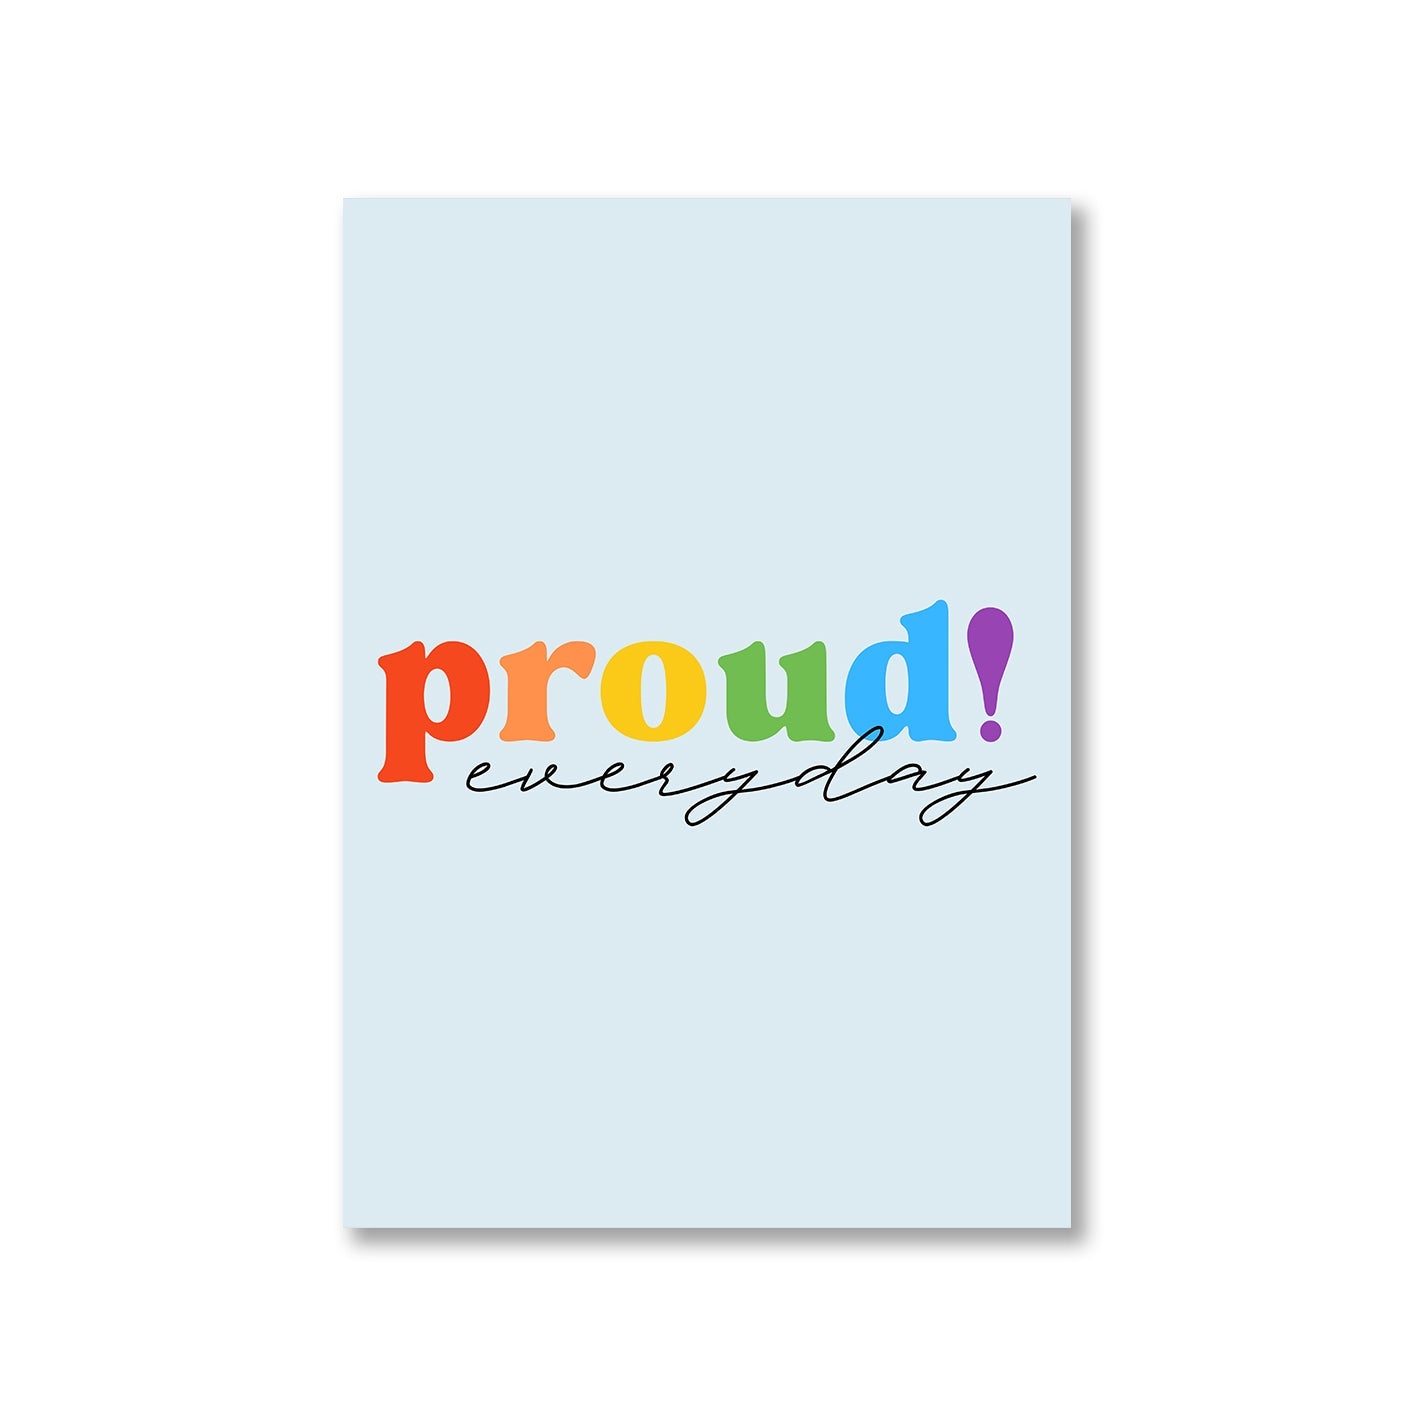 pride proud everyday poster wall art buy online india the banyan tee tbt a4 - lgbtqia+